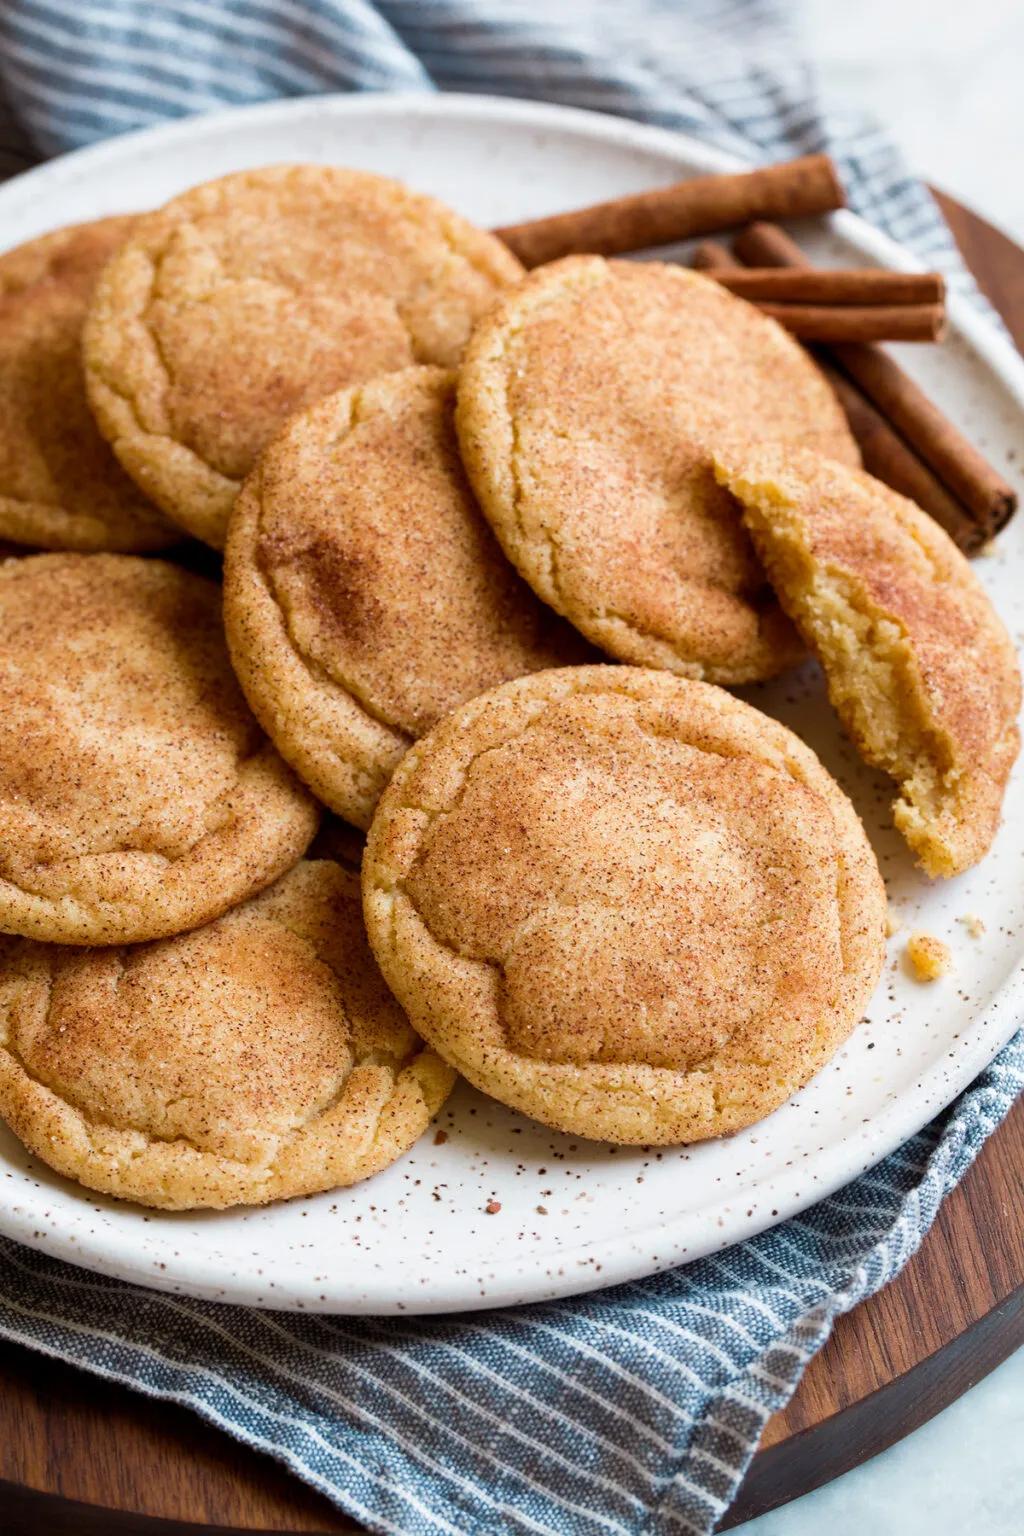 Snickerdoodle Cookies Recipe {Soft and Chewy!} - Cooking Classy